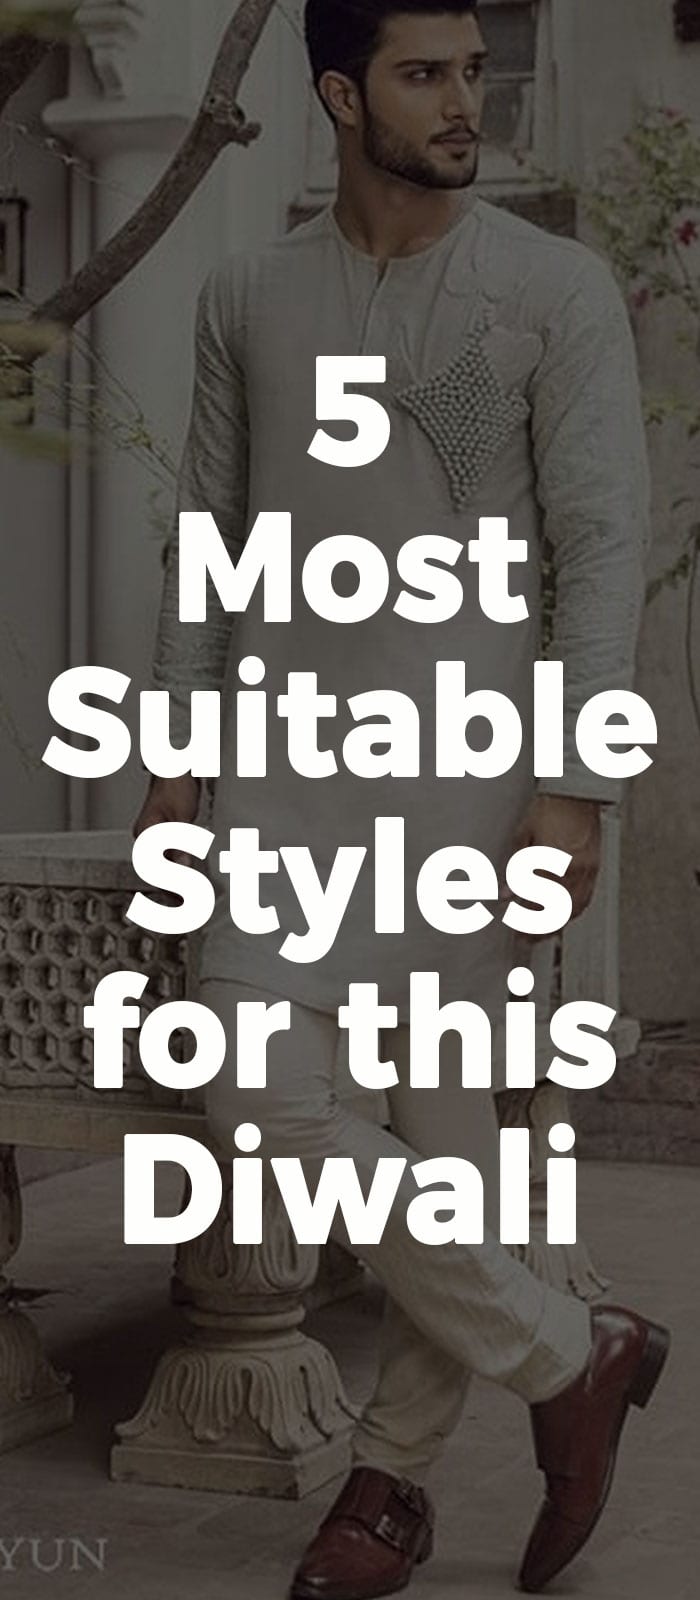 5 Most Suitable Styles for this Diwali